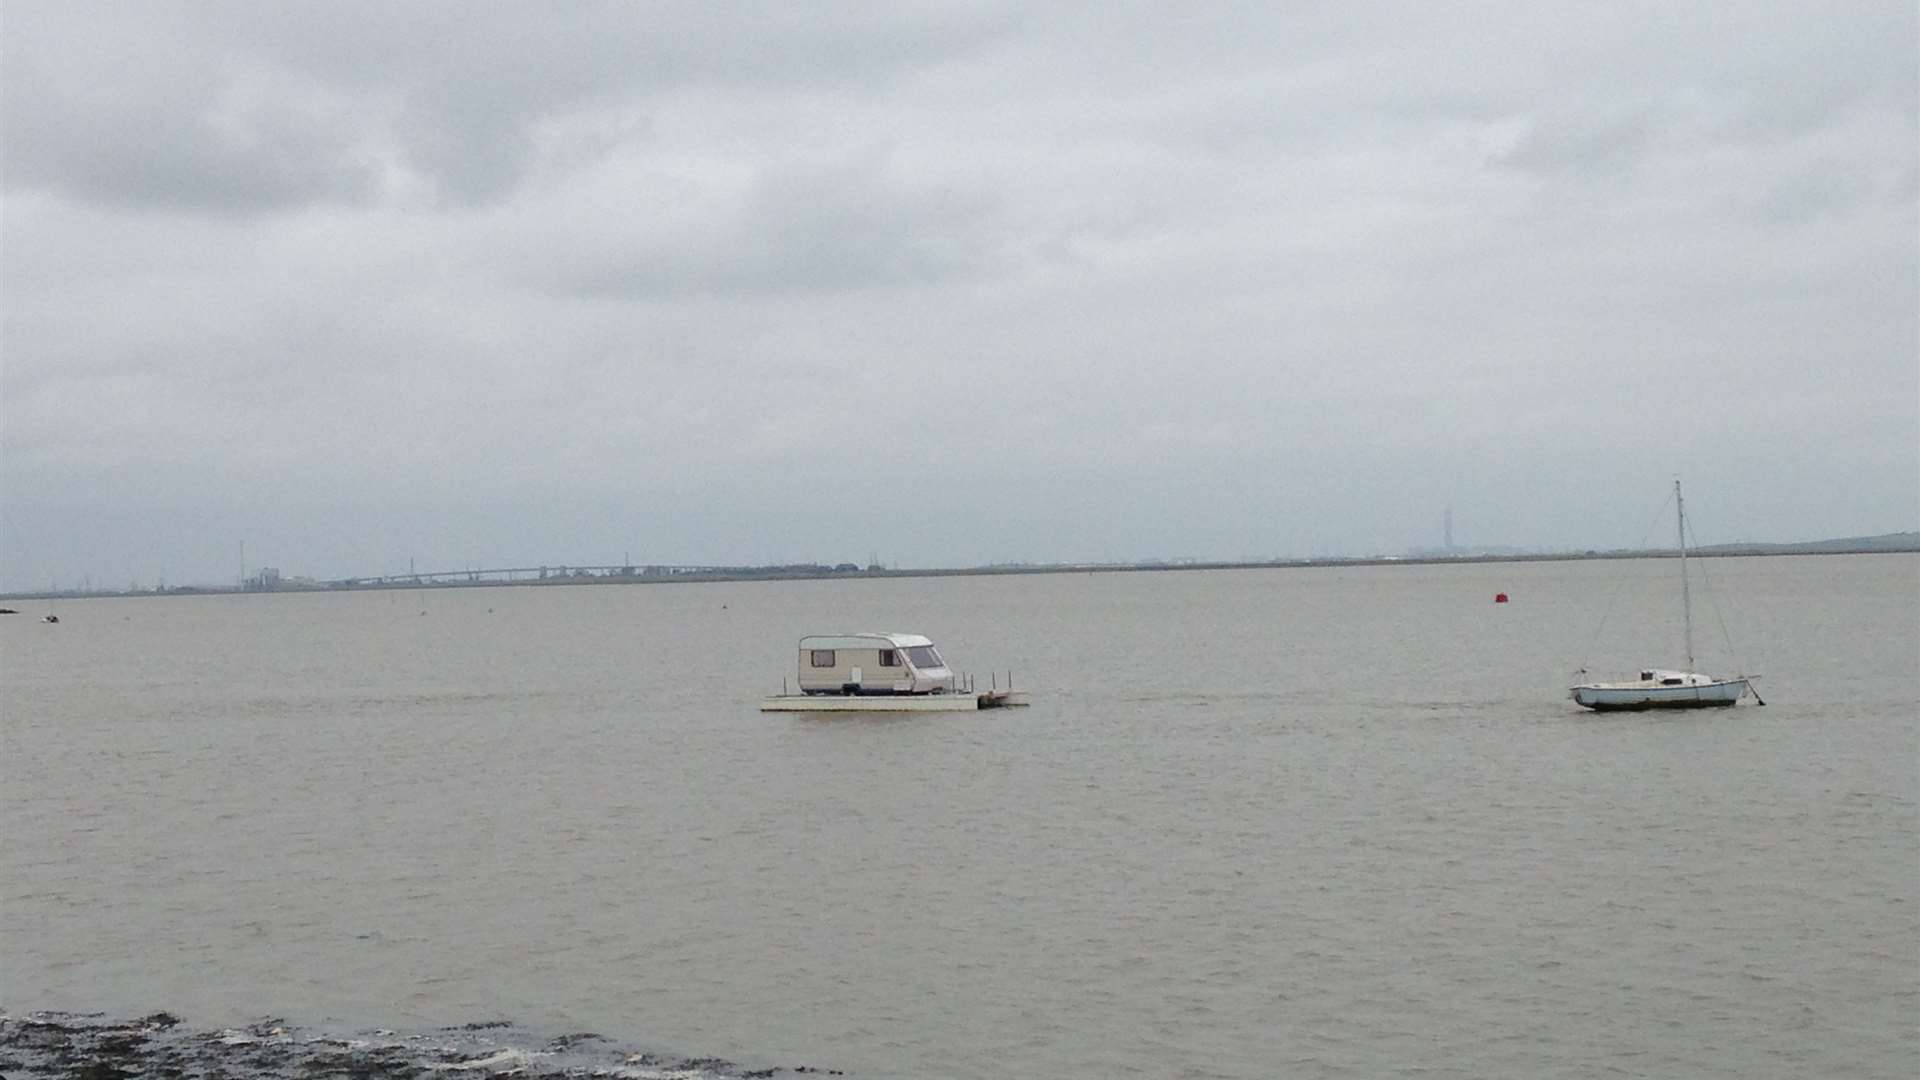 The caravan boat spotted in the Swale